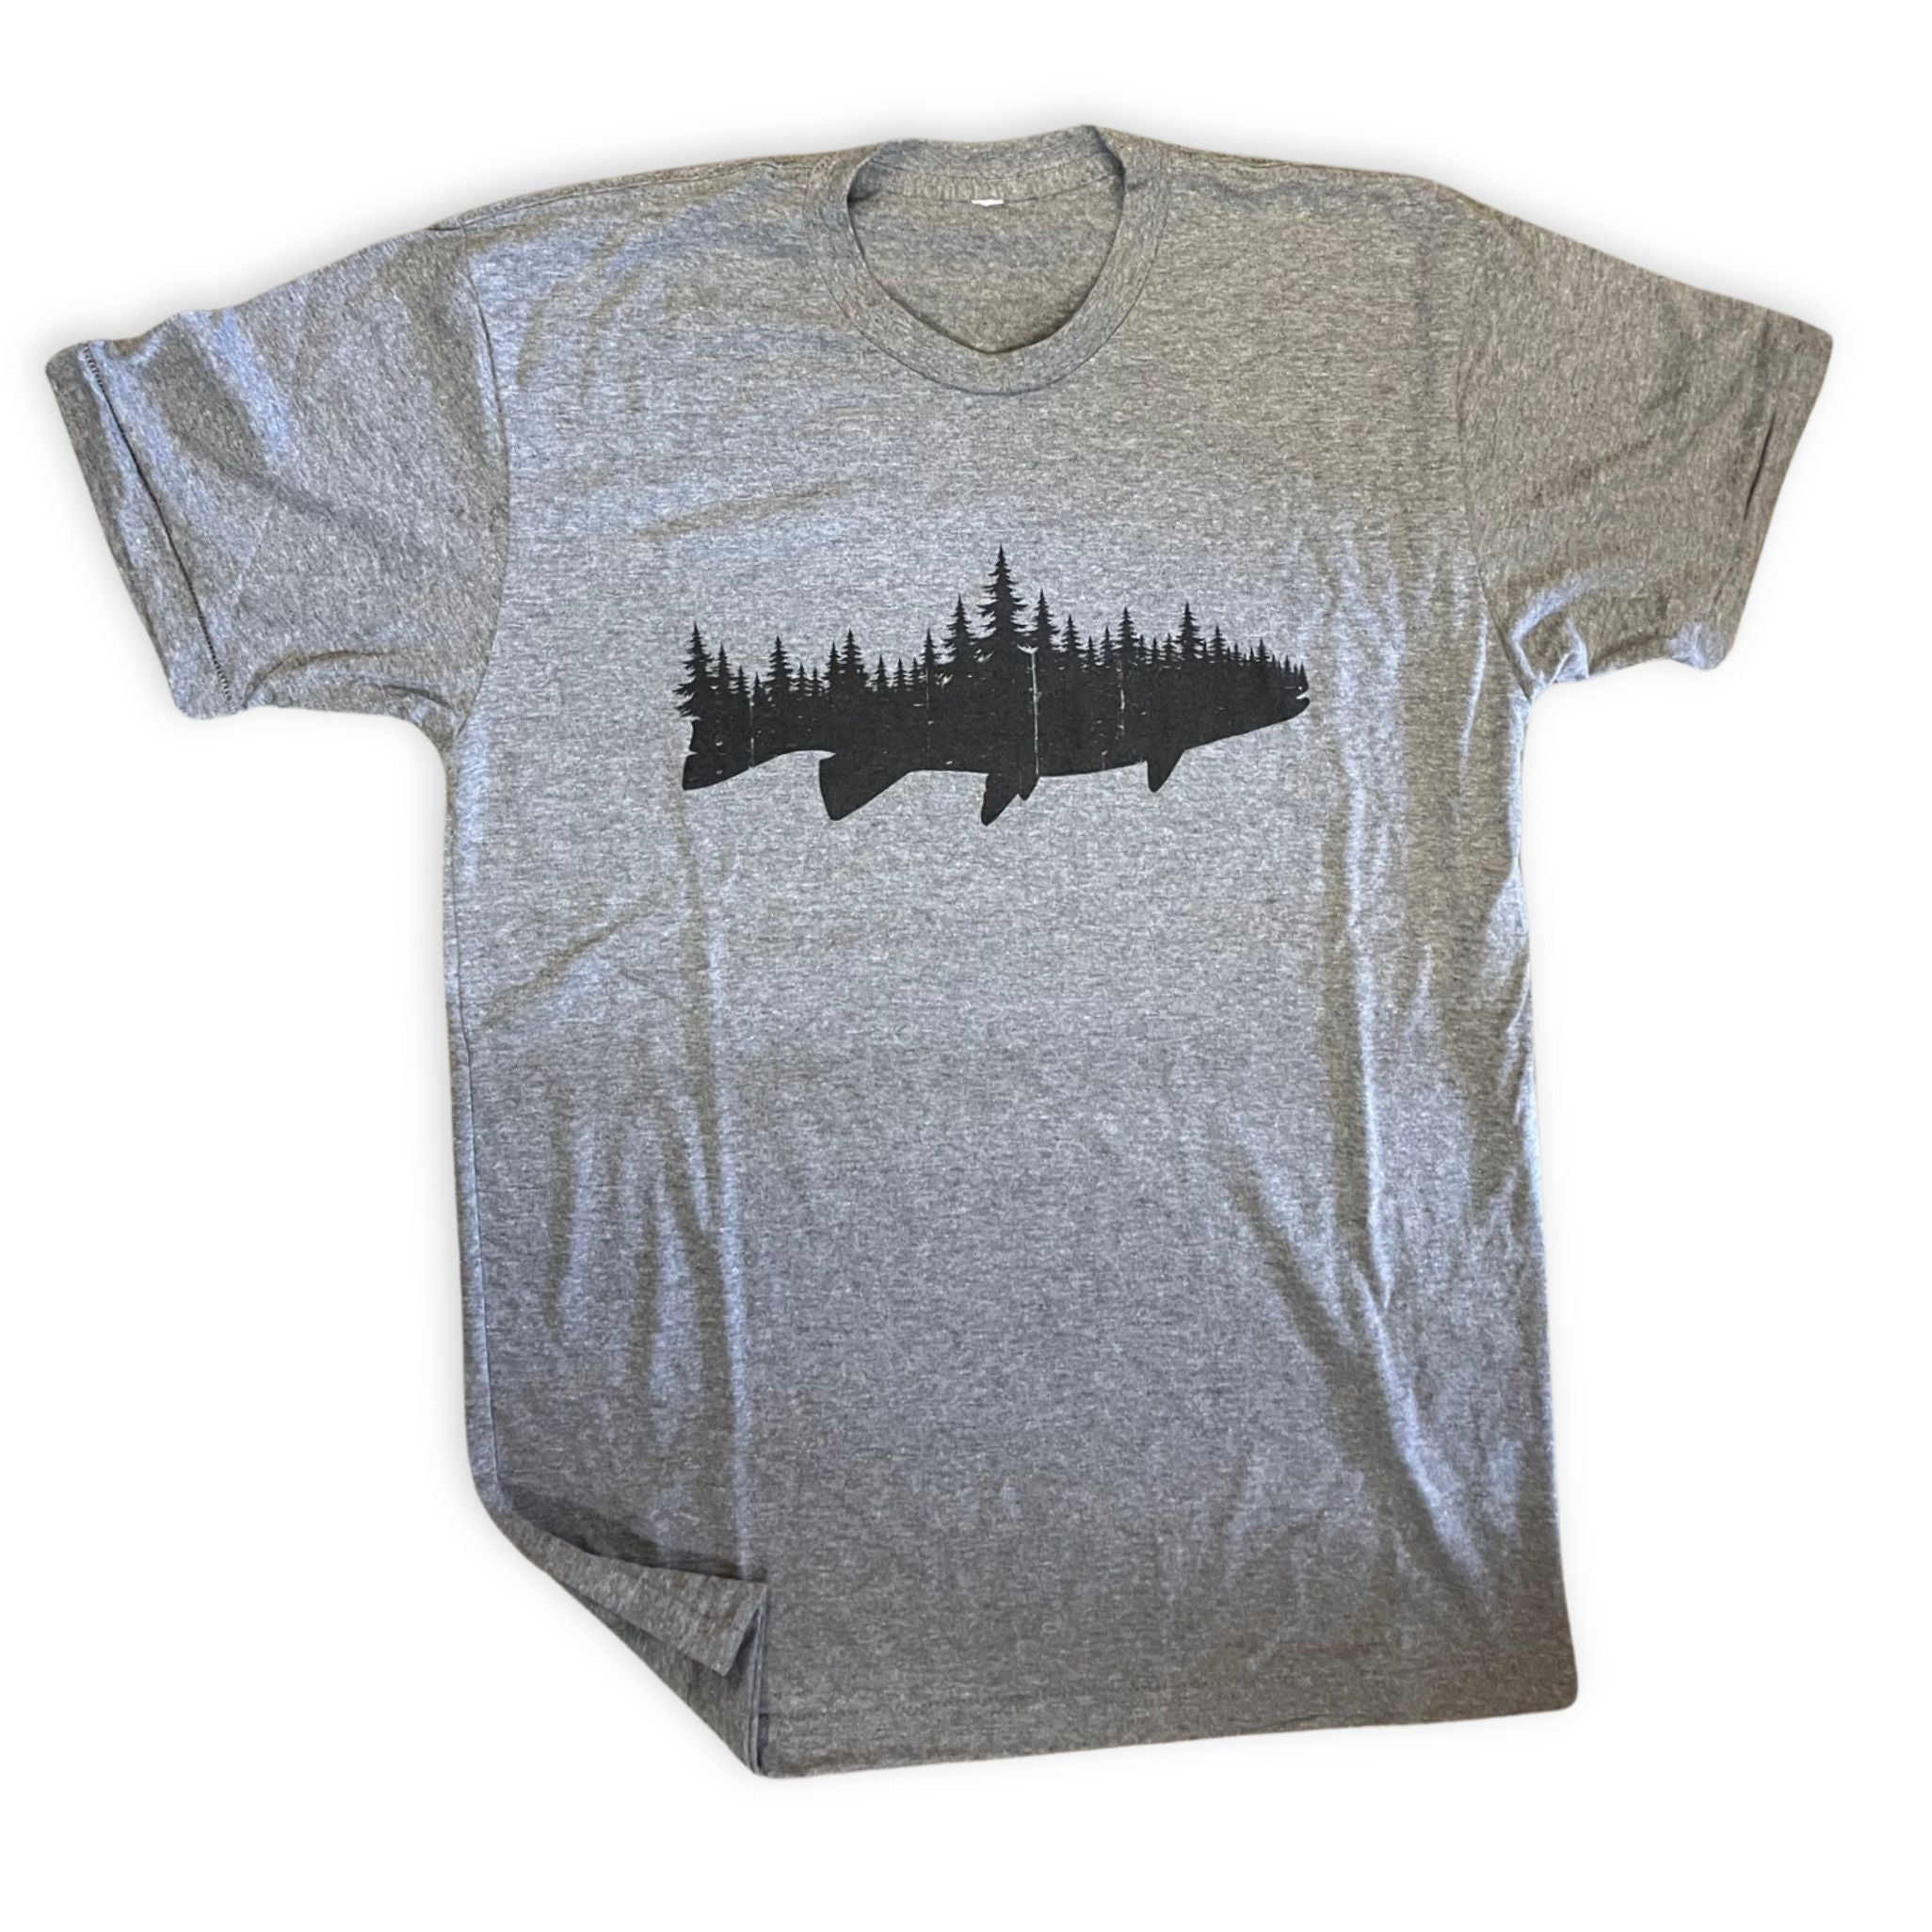 heather grey shirt with charcoal lish and forest mashed up design